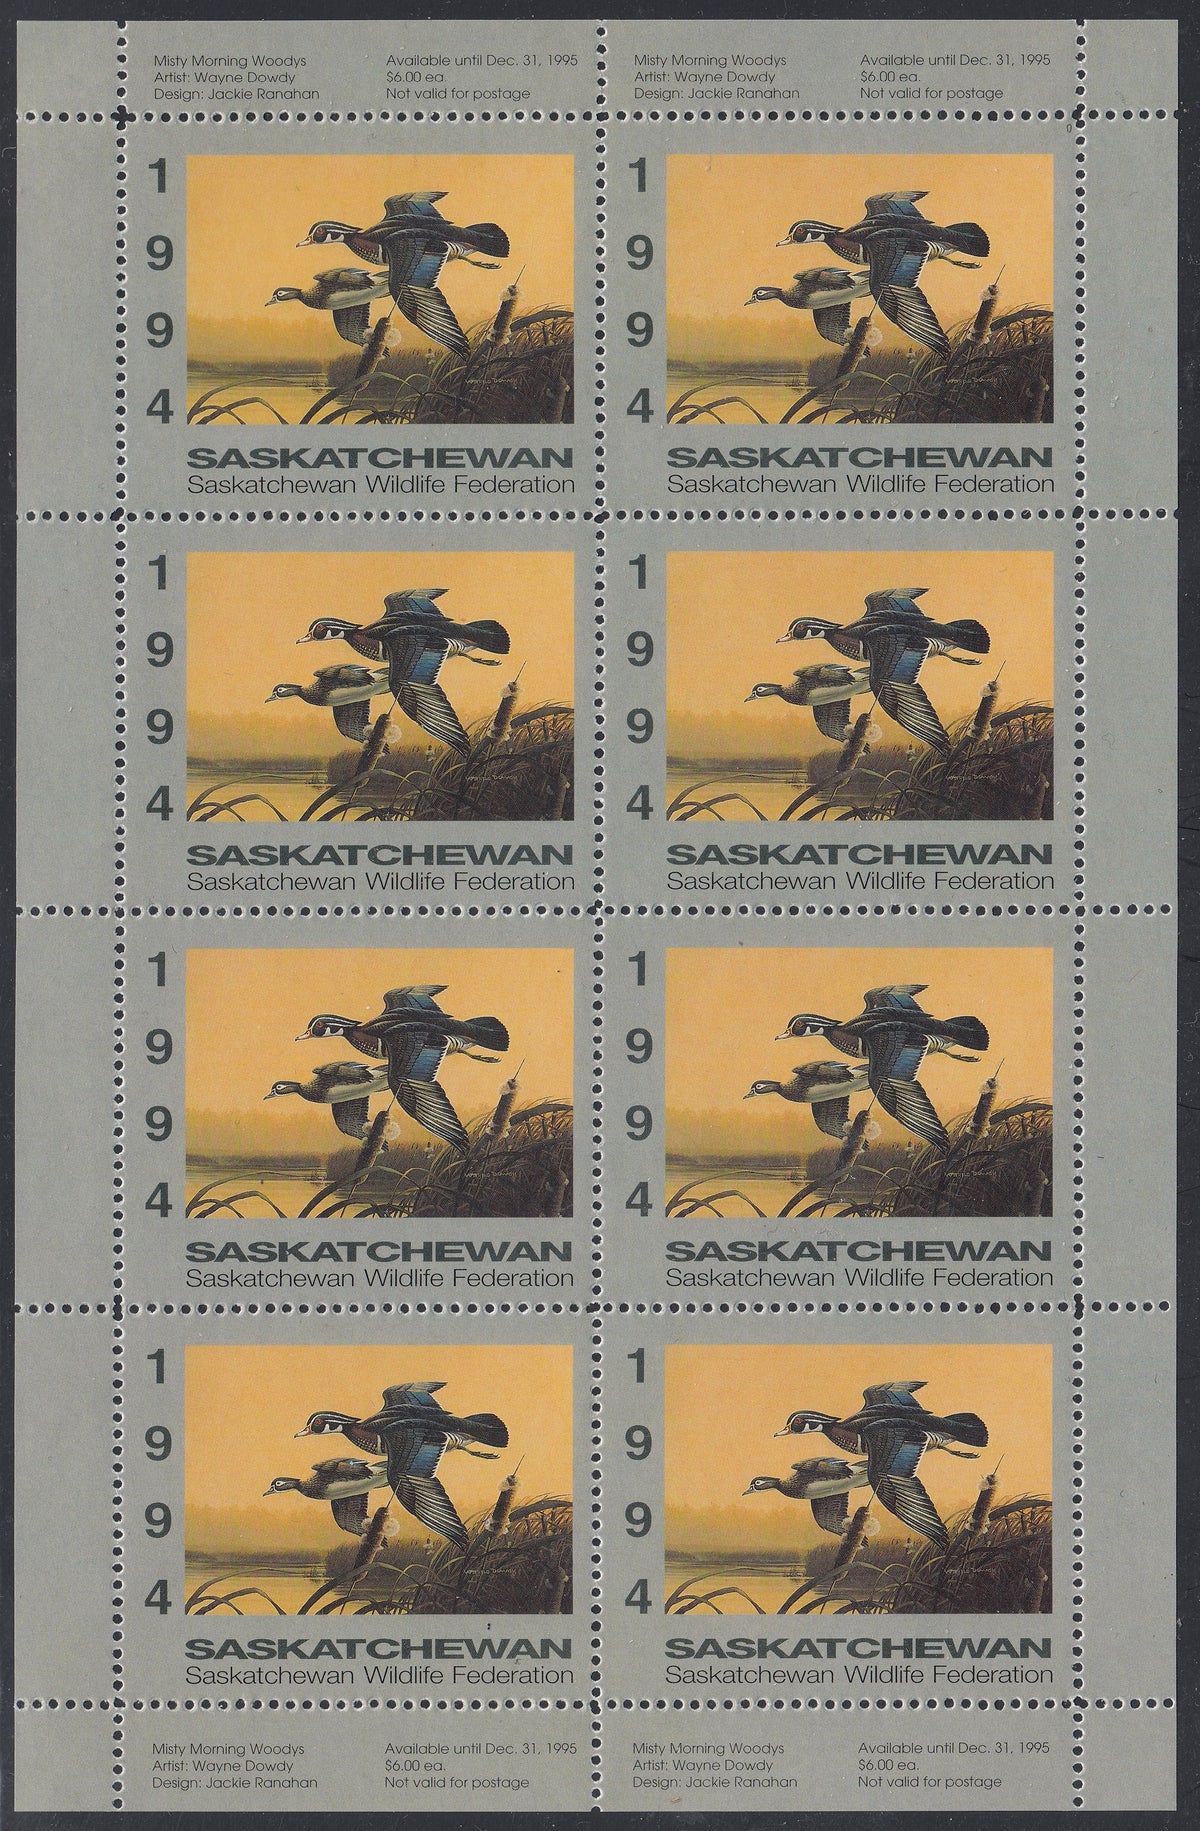 0263NL2207 - SW5 - Mint Complete Sheet of 8